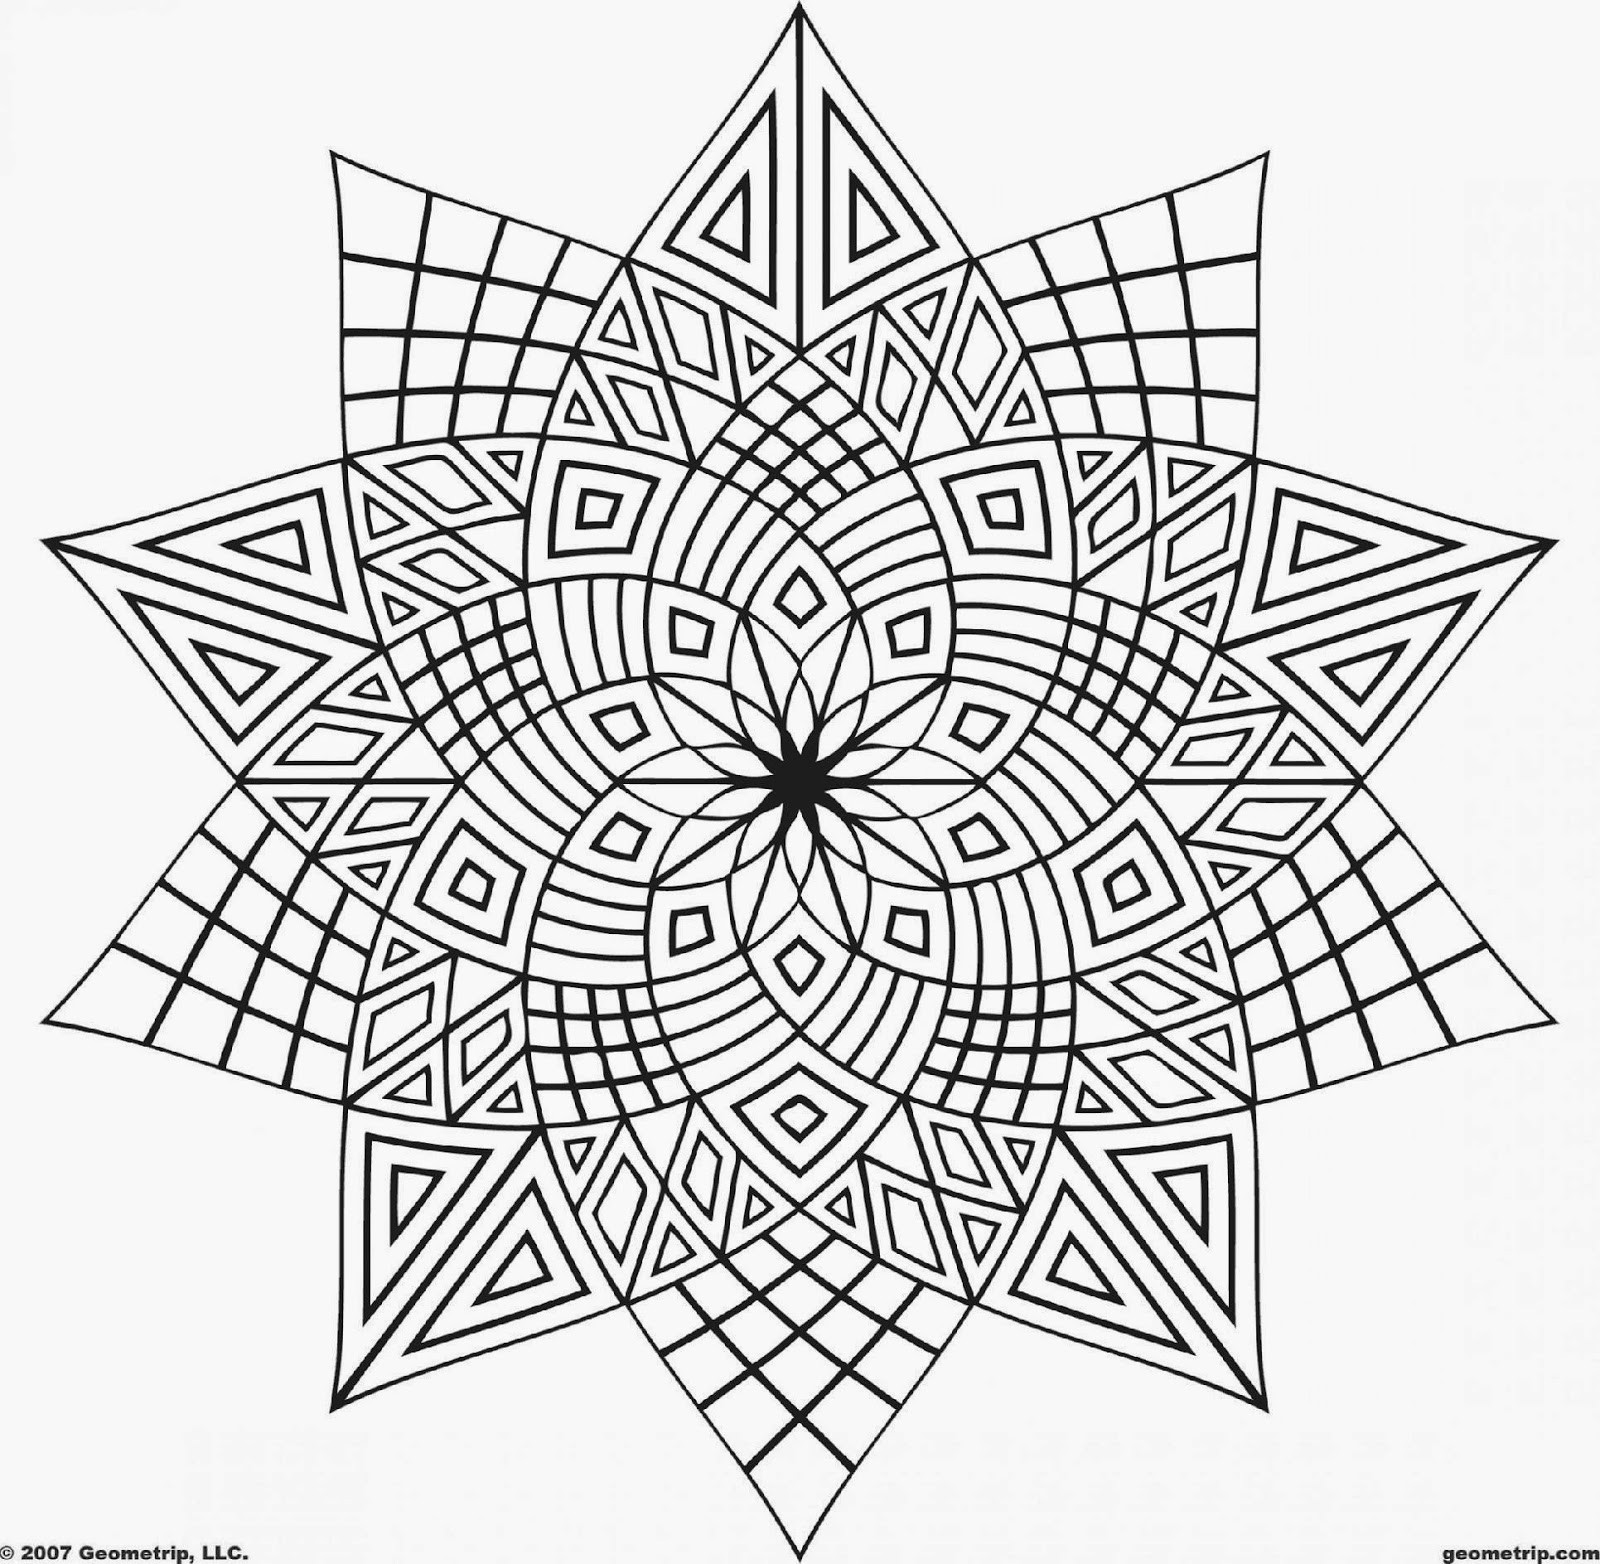 Cool Printable Coloring Pages For Adults
 Diwali Crafts For Children Pinterest Diwali Diwali